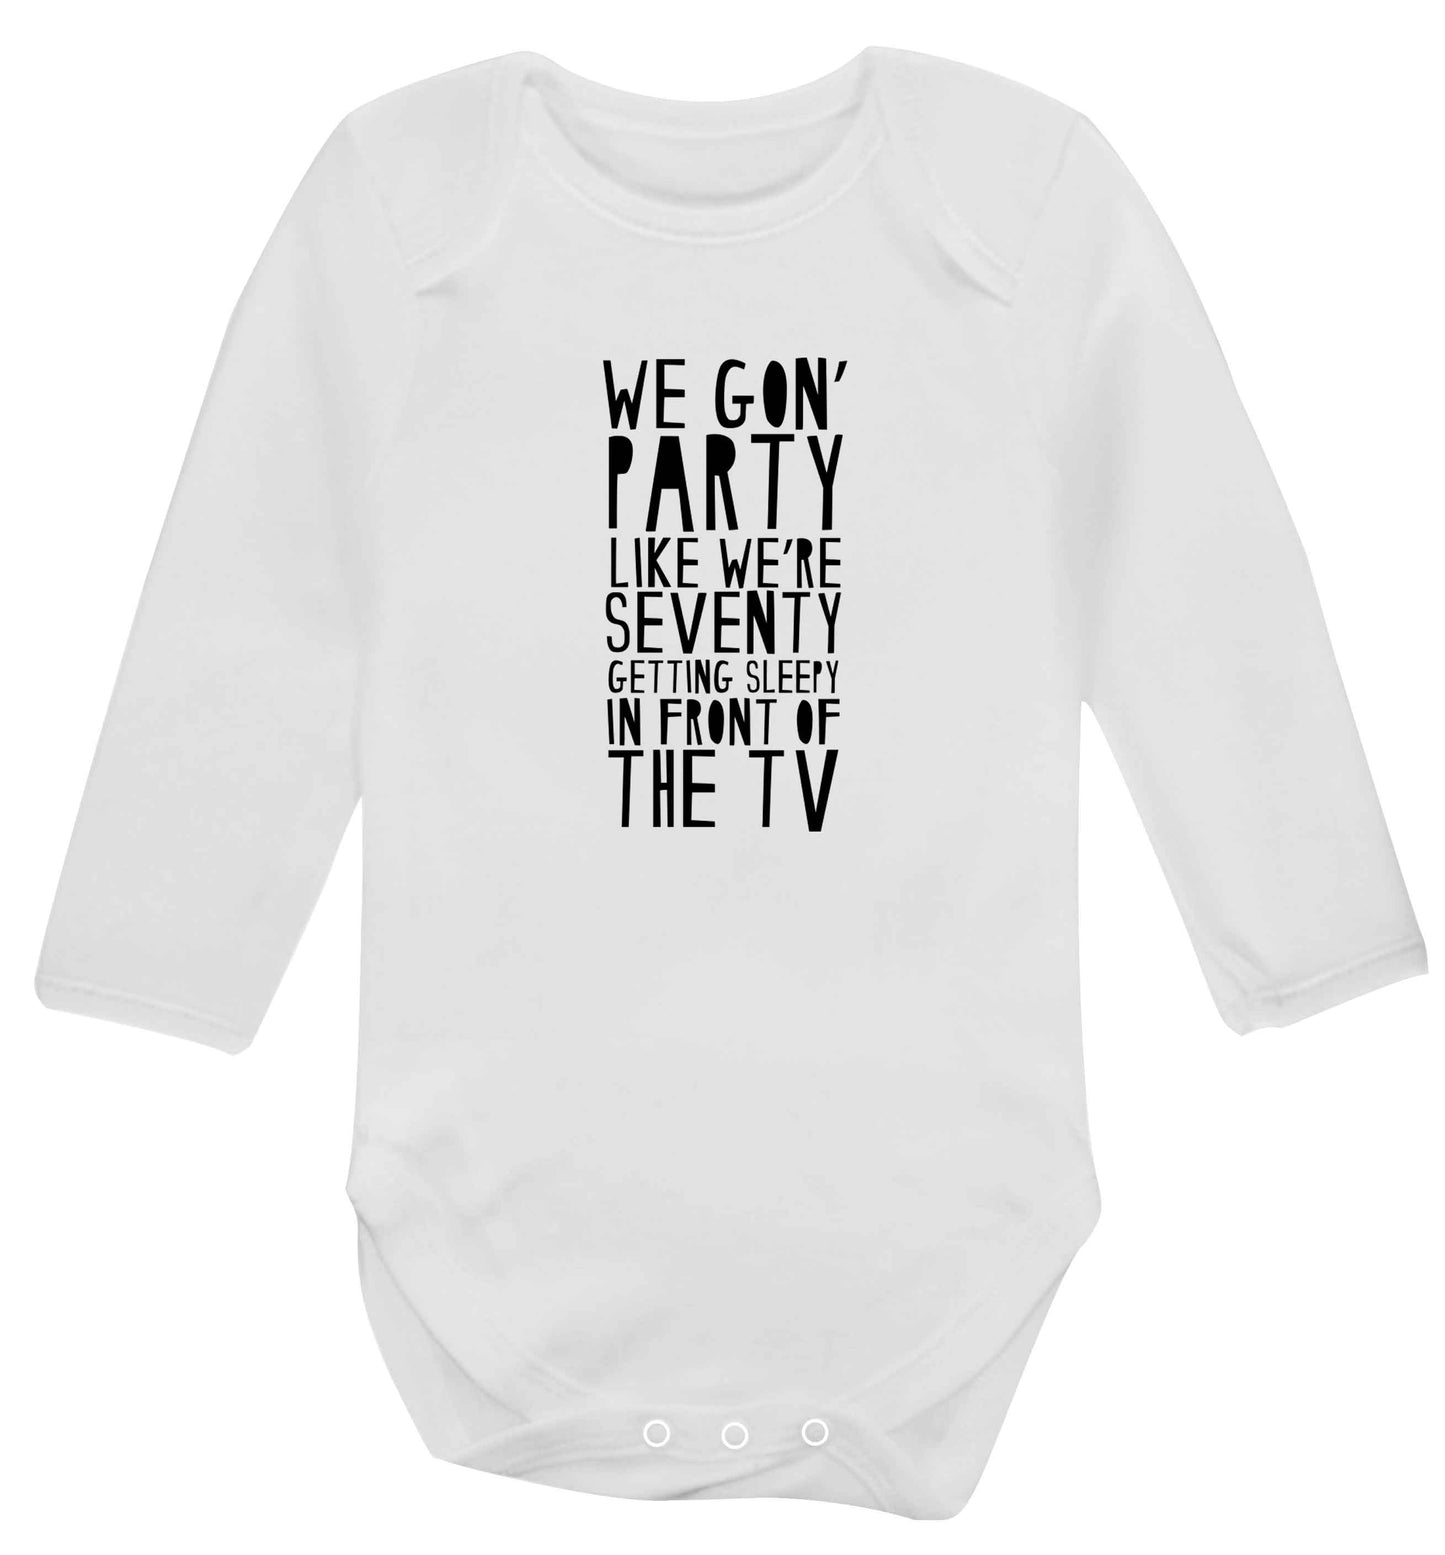 We gon' party like we're seventy getting sleepy in front of the TV baby vest long sleeved white 6-12 months